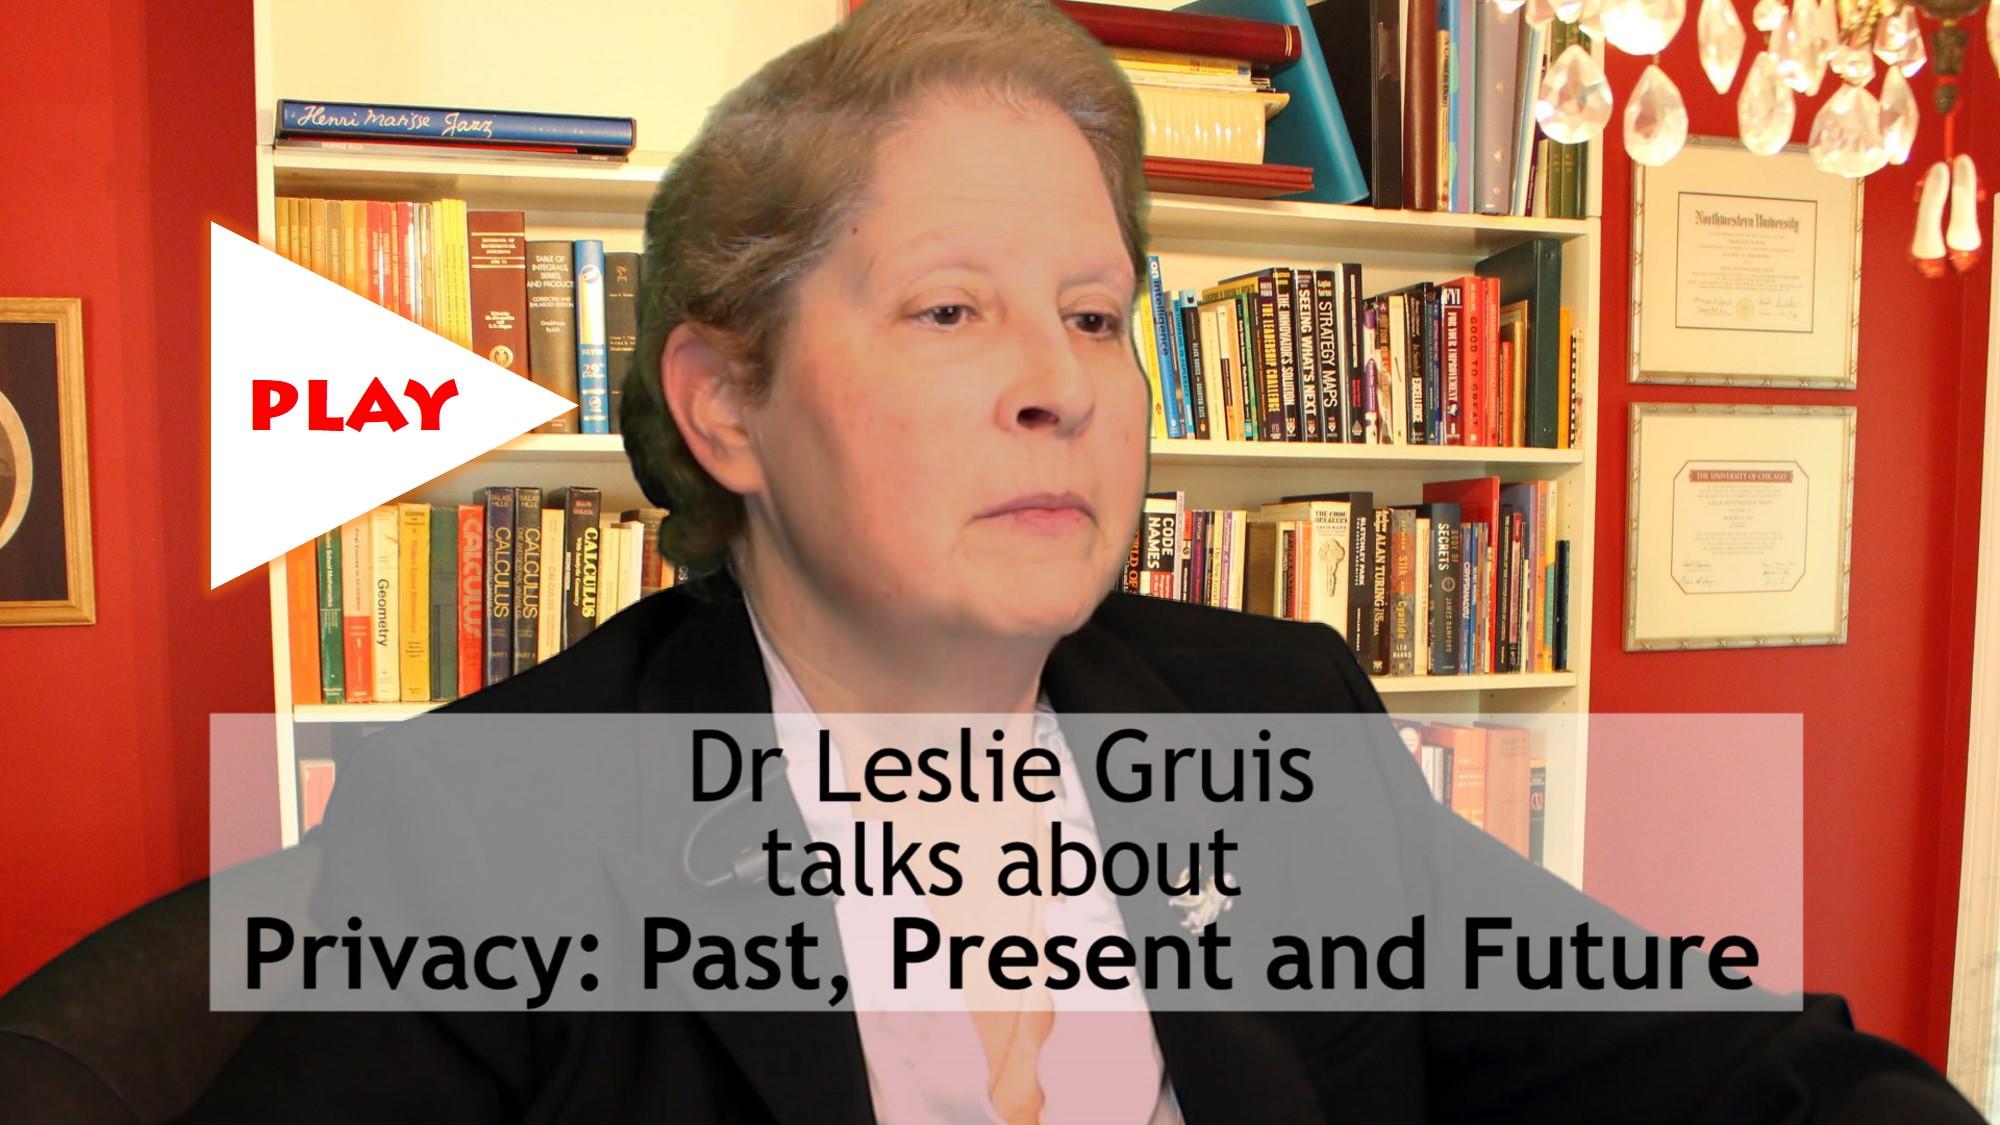 Dr Leslie Gruis talks about Privacy: Past, Present and Future